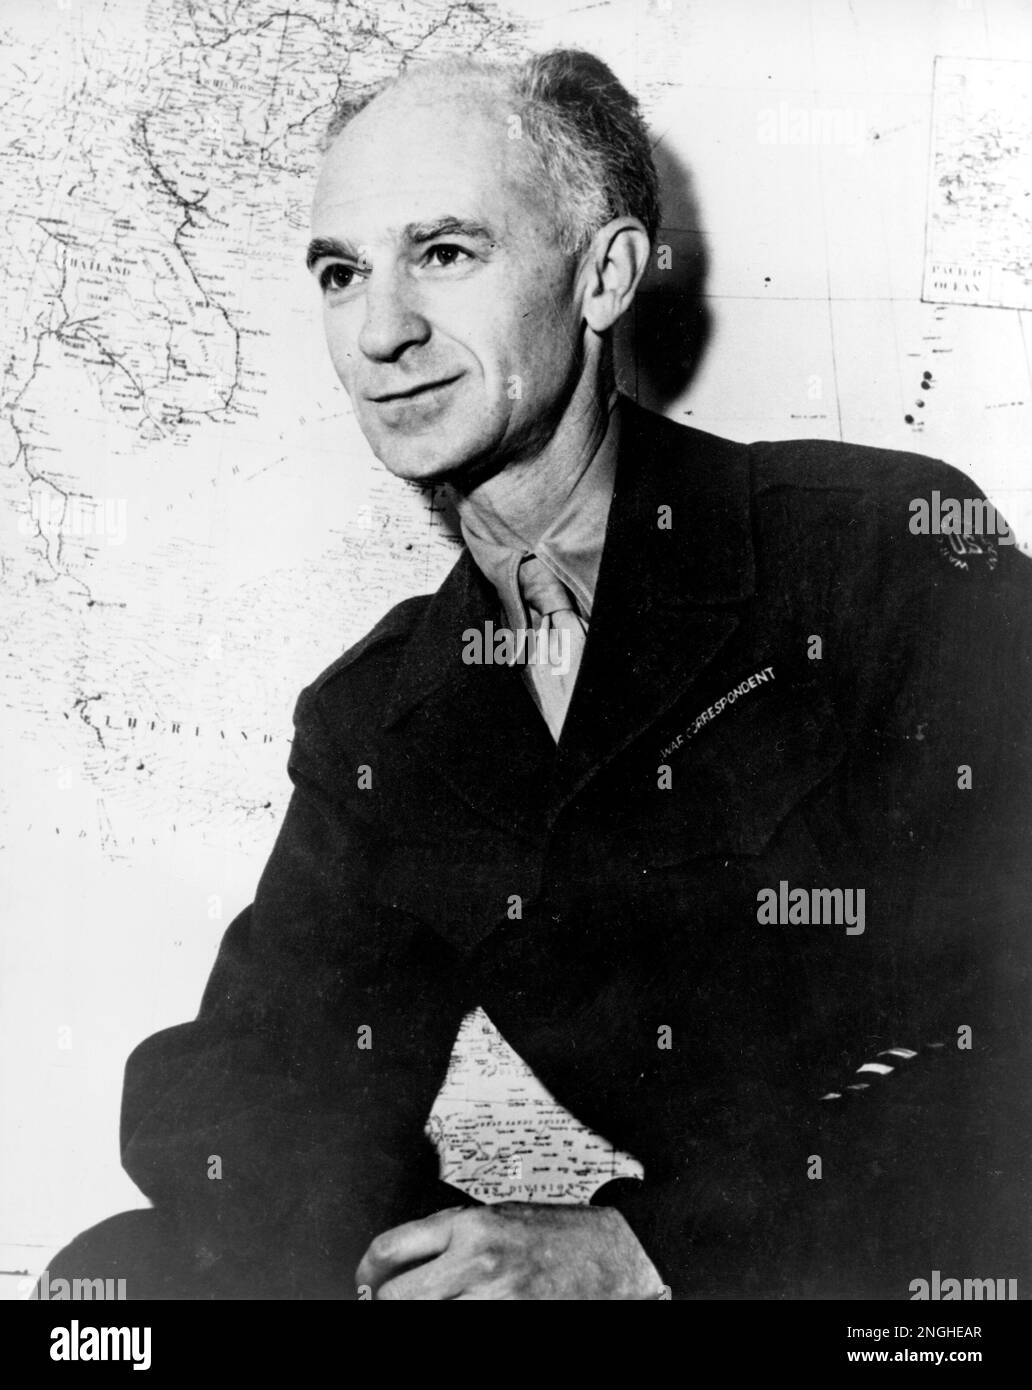 U.S. war correspondent Ernie Pyle poses on March 1, 1945 at an unknown location. Pyle will set out for the Pacific to cover the naval side of the war against Japan in World War II. (AP Photo) Stock Photo